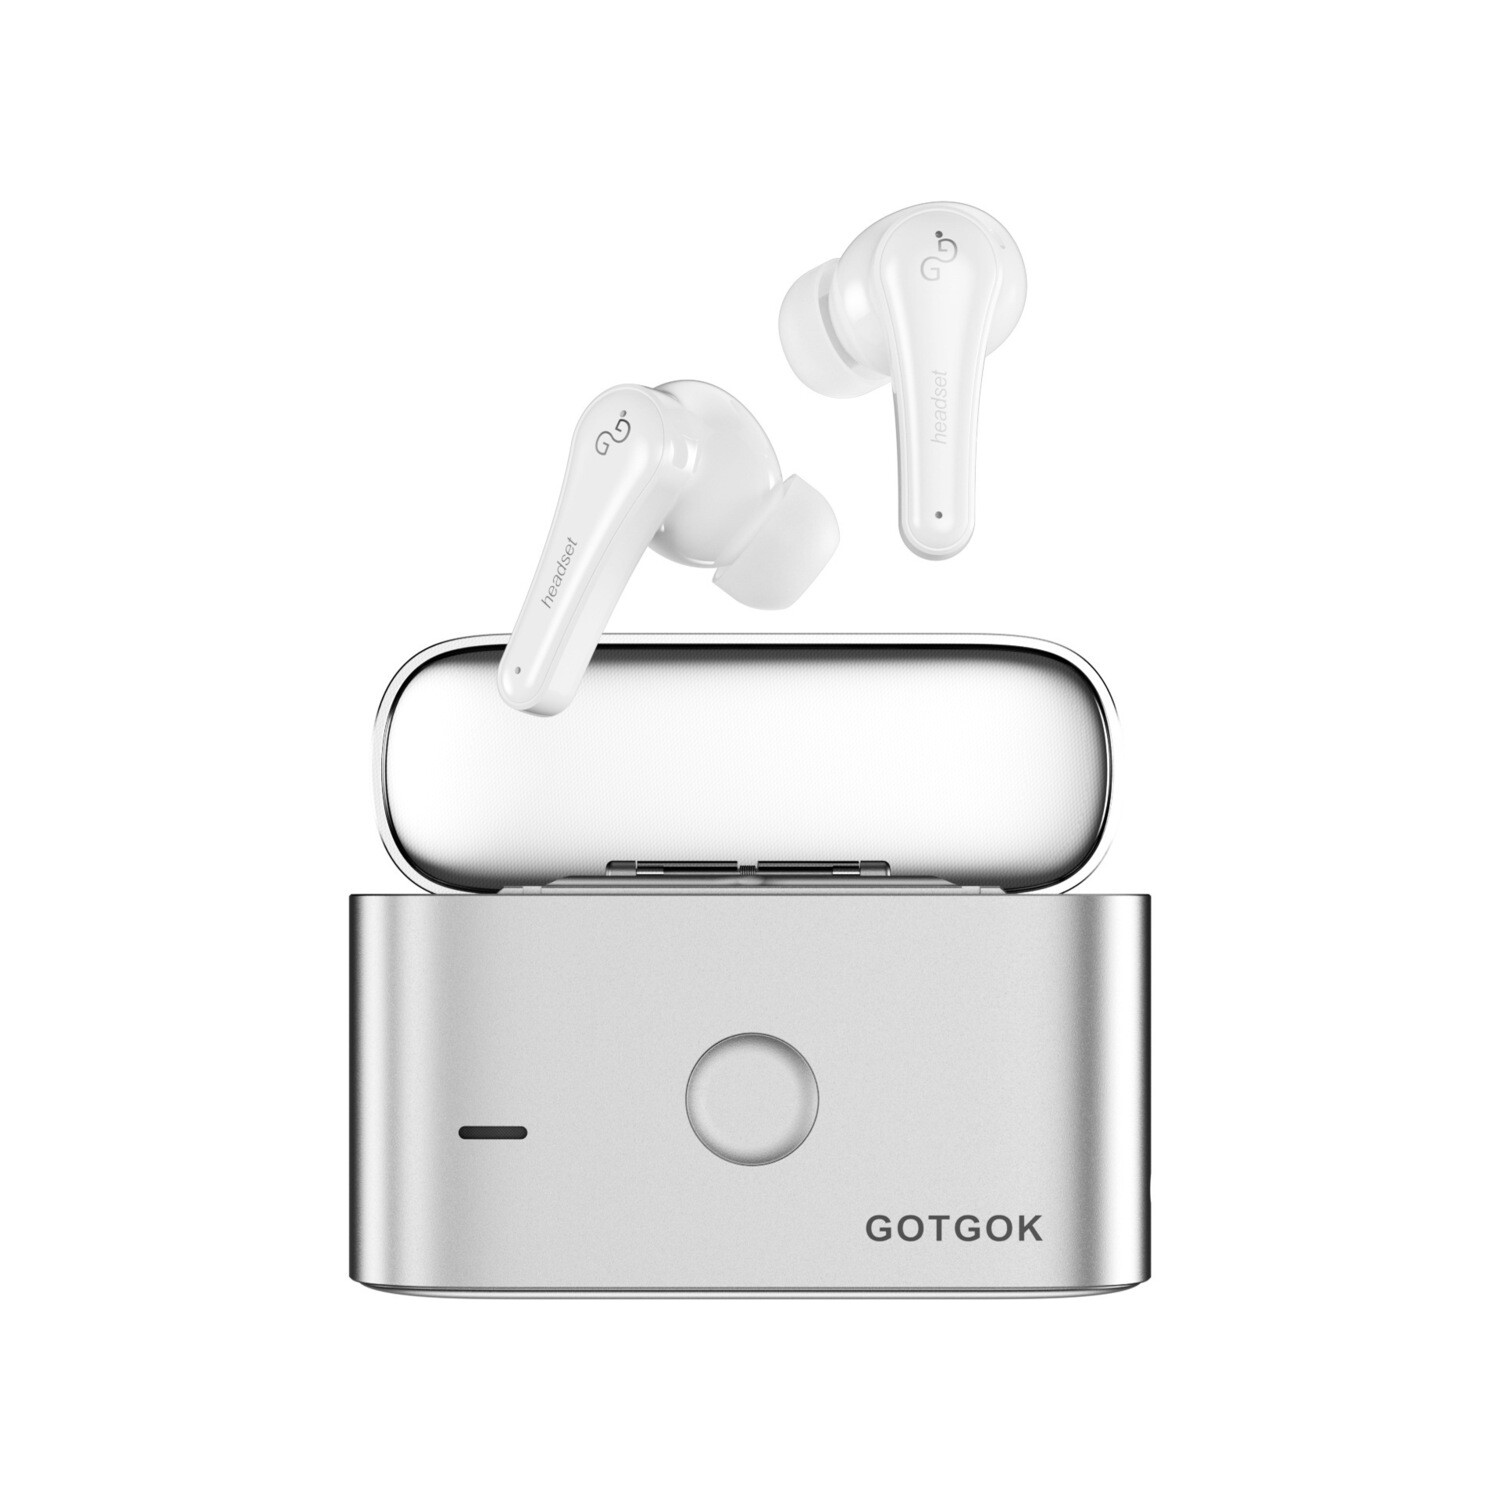 Automatic Flip-up Mechanical Cabin Bluetooth Headset With High Sound Quality And Super Battery Life, Color: White